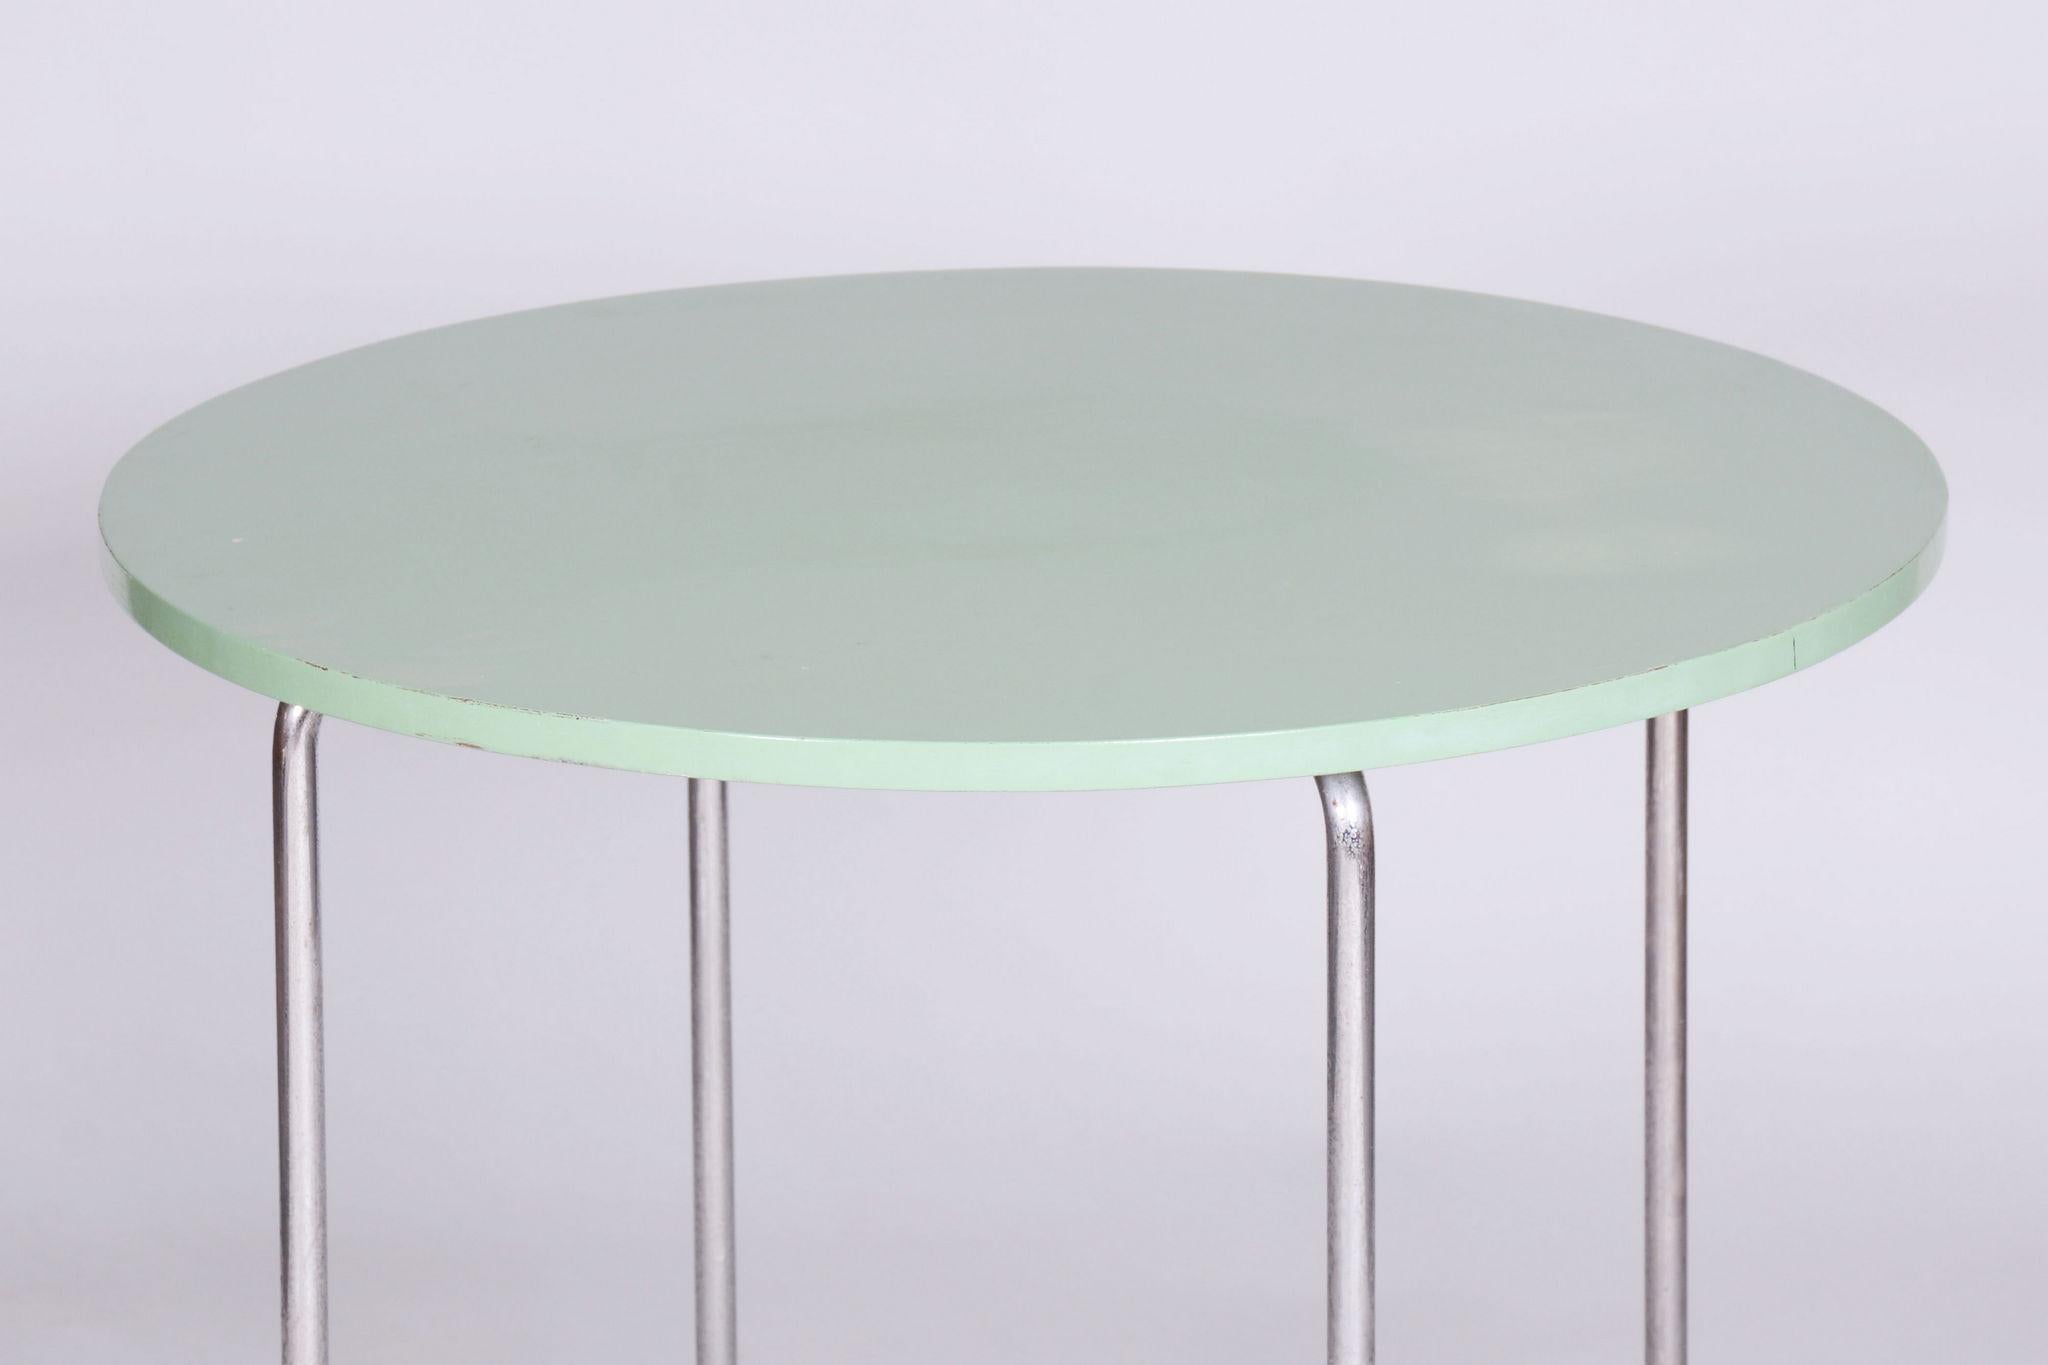 Restored Bauhaus Round Table, Chrome, Revived Polish, Czechia, 1930s For Sale 1